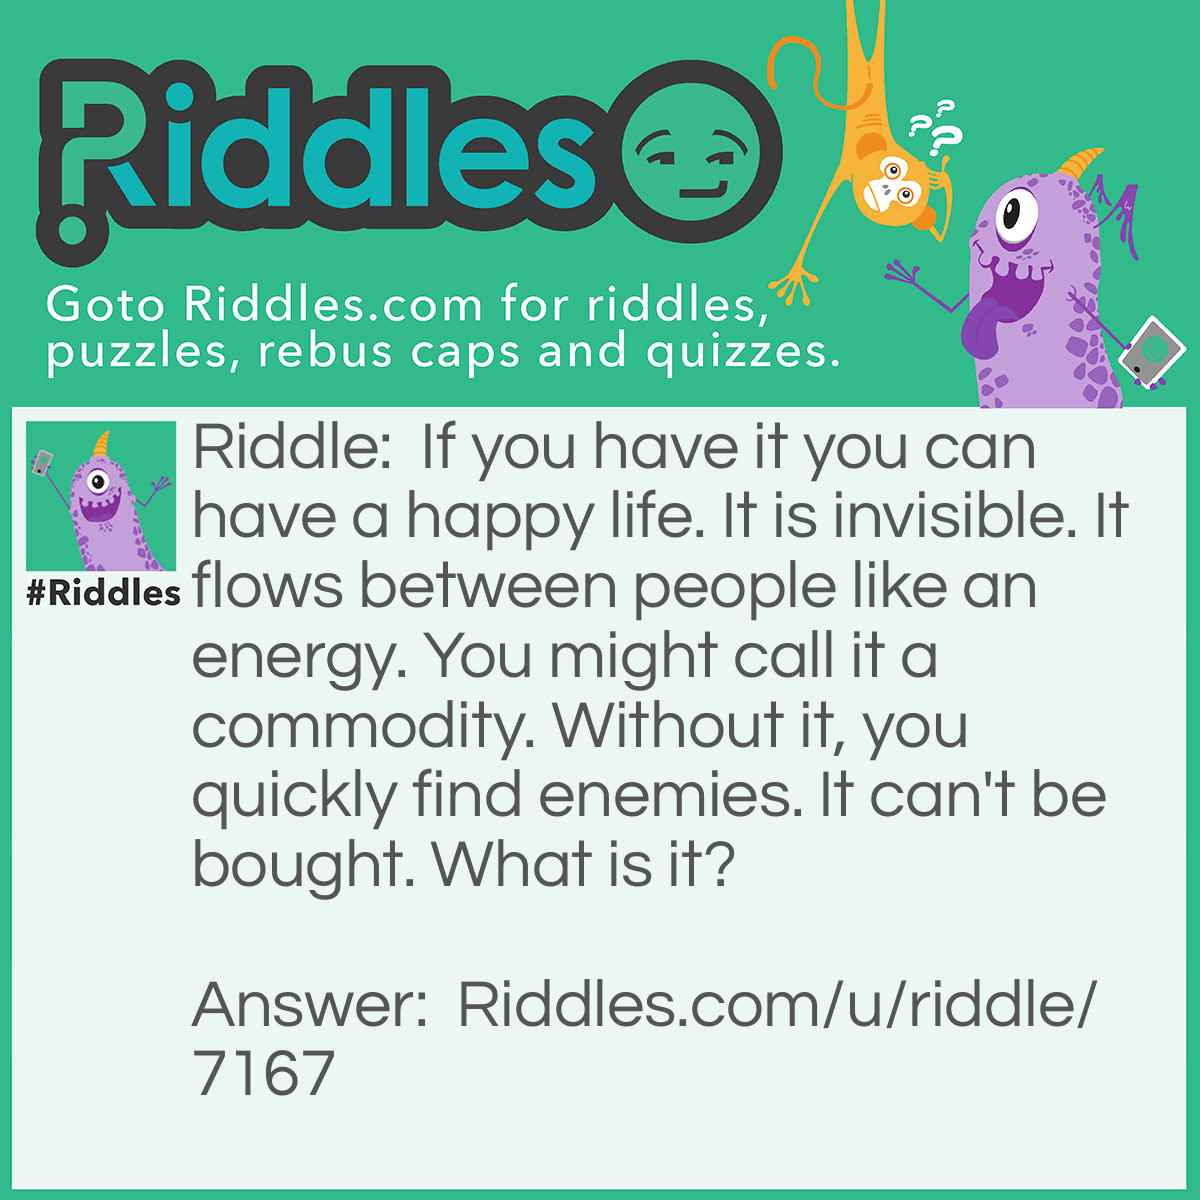 Riddle: If you have it you can have a happy life. It is invisible. It flows between people like an energy. You might call it a commodity. Without it, you quickly find enemies. It can't be bought. What is it? Answer: Effort.